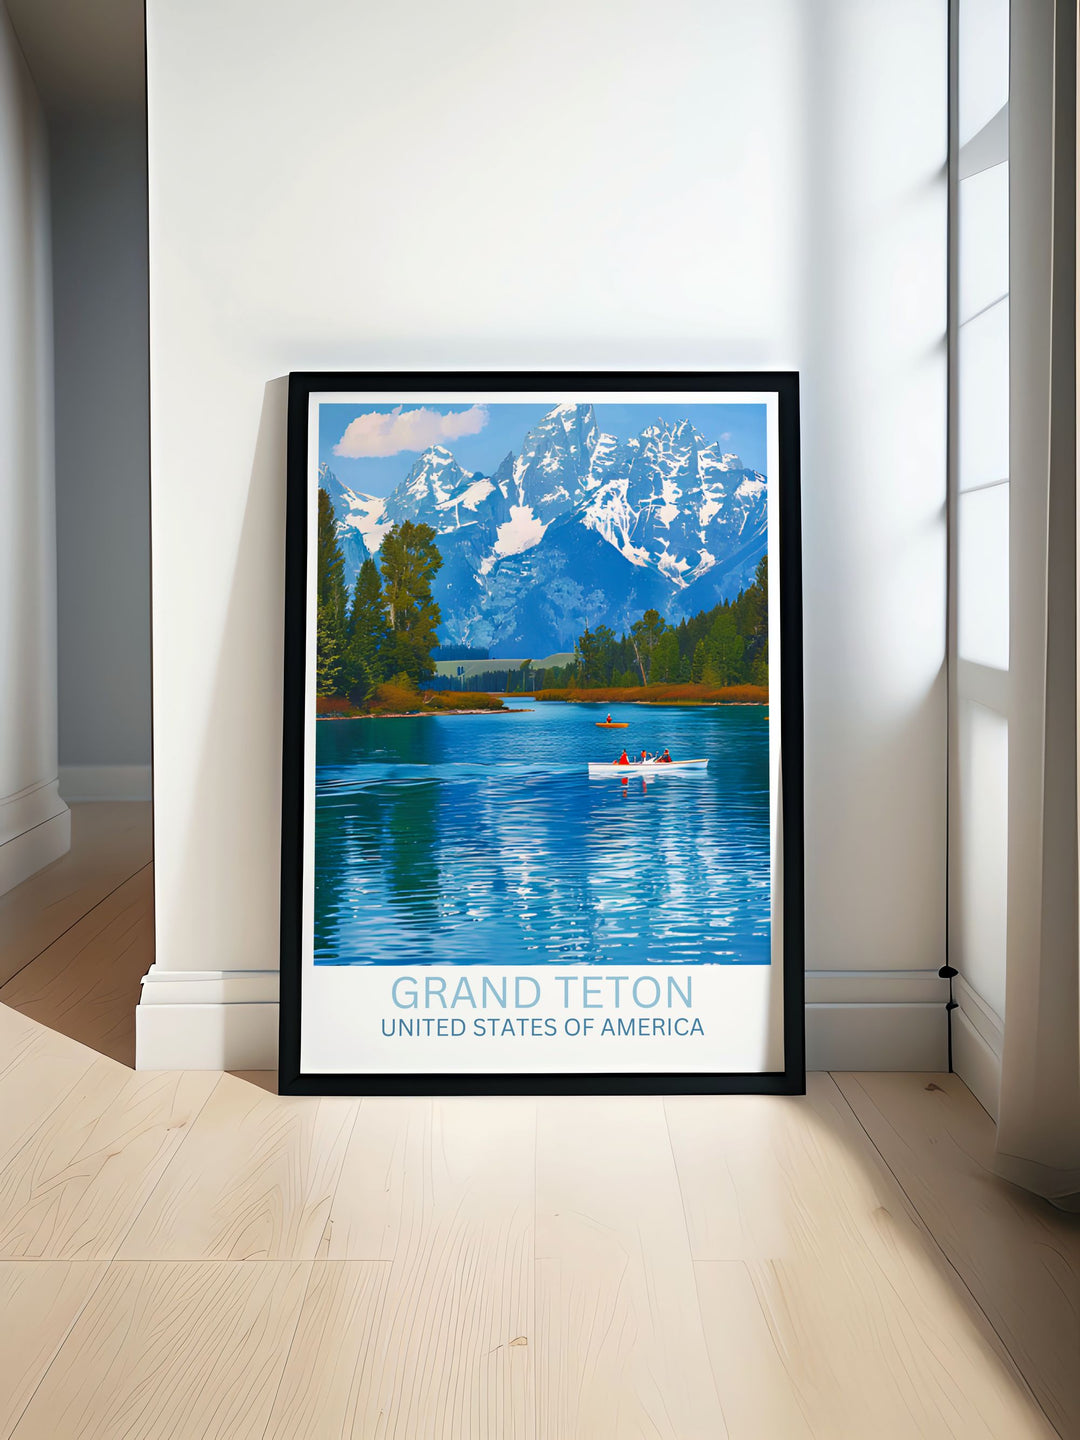 Detailed artistic rendition of Jackson Lake with the reflection of Grand Teton in the calm waters, perfect for a peaceful home environment.